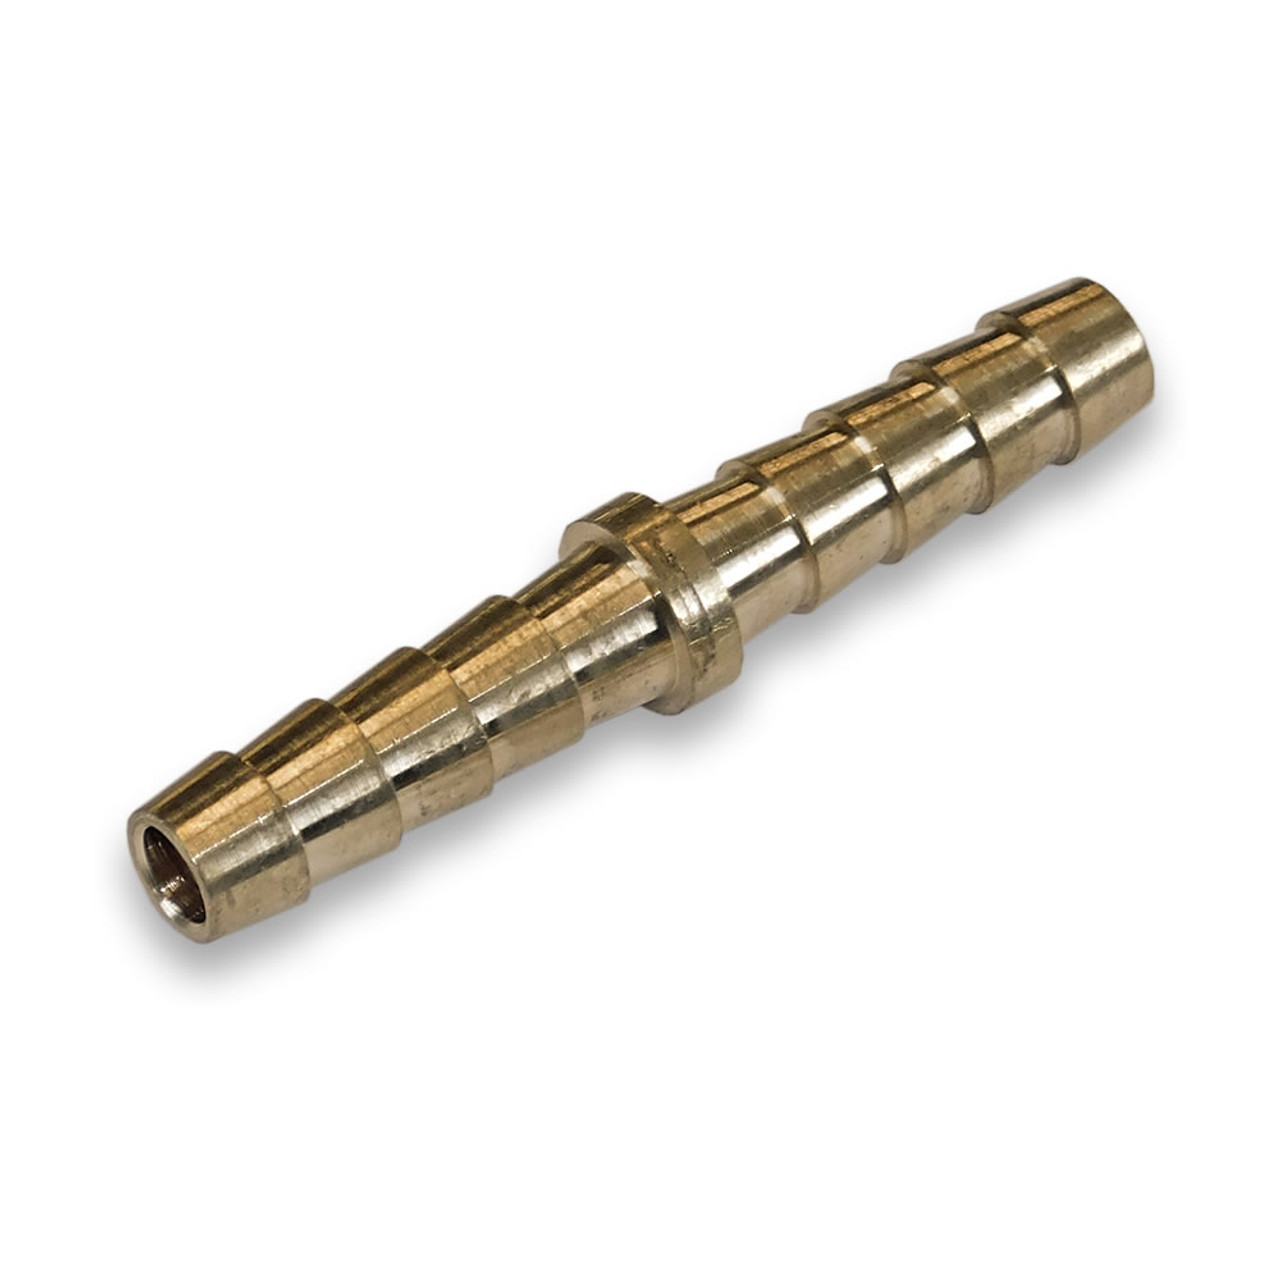 Brass Double Hose Barb Fittings – Hose Repair Splicers